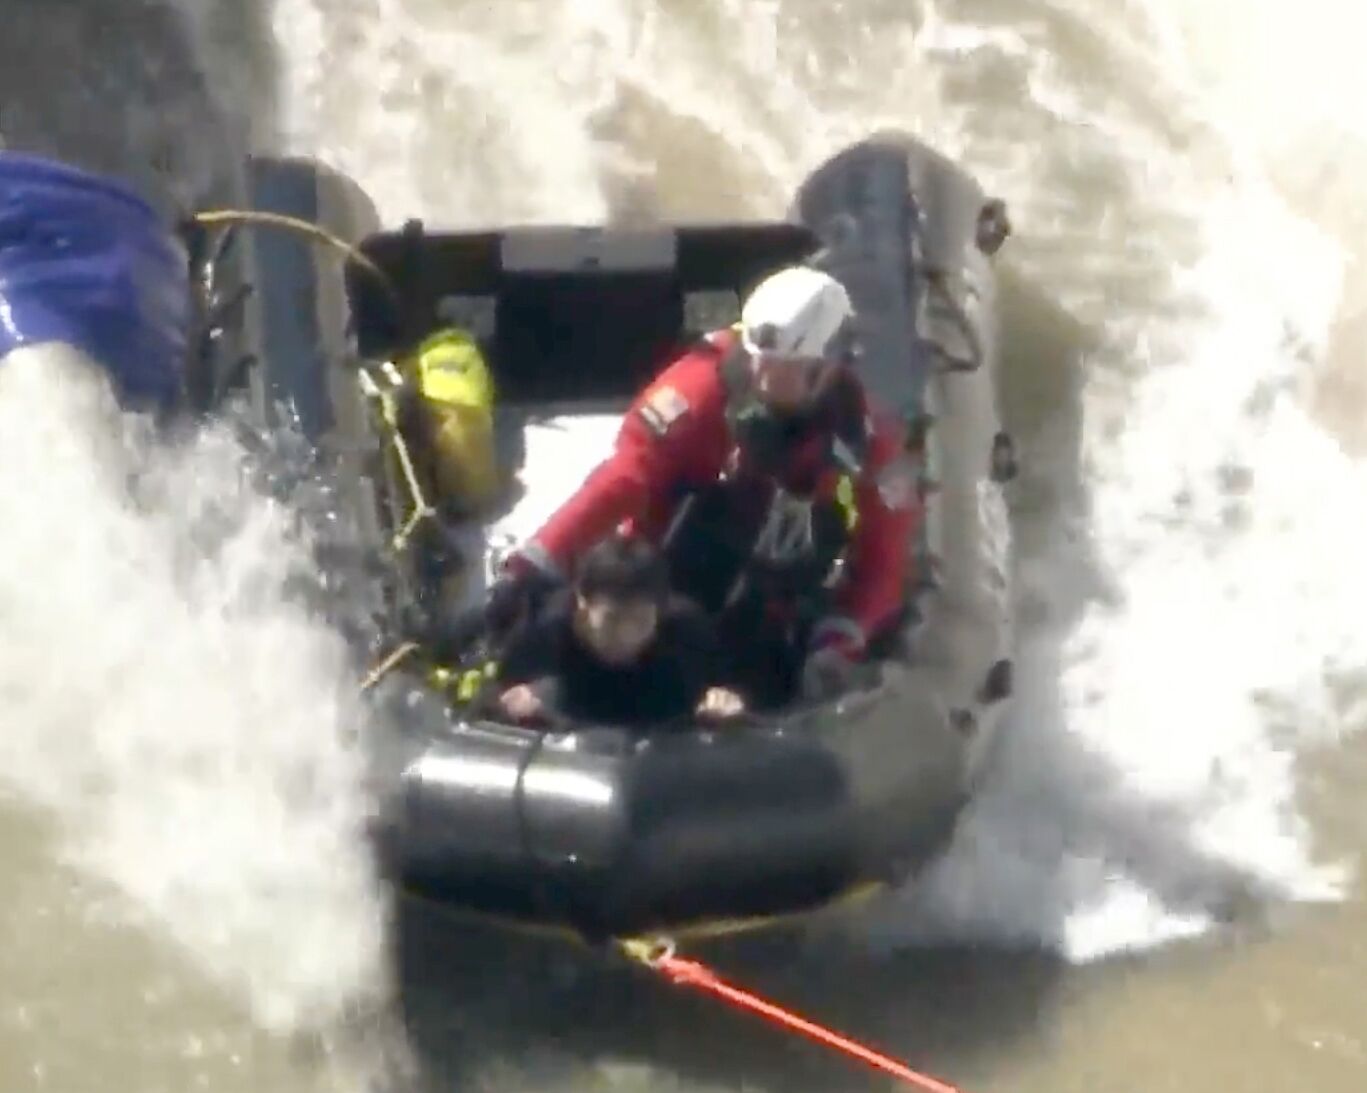 Man rescued from storm runoff after being swept 2.5 miles down Pacoima Wash